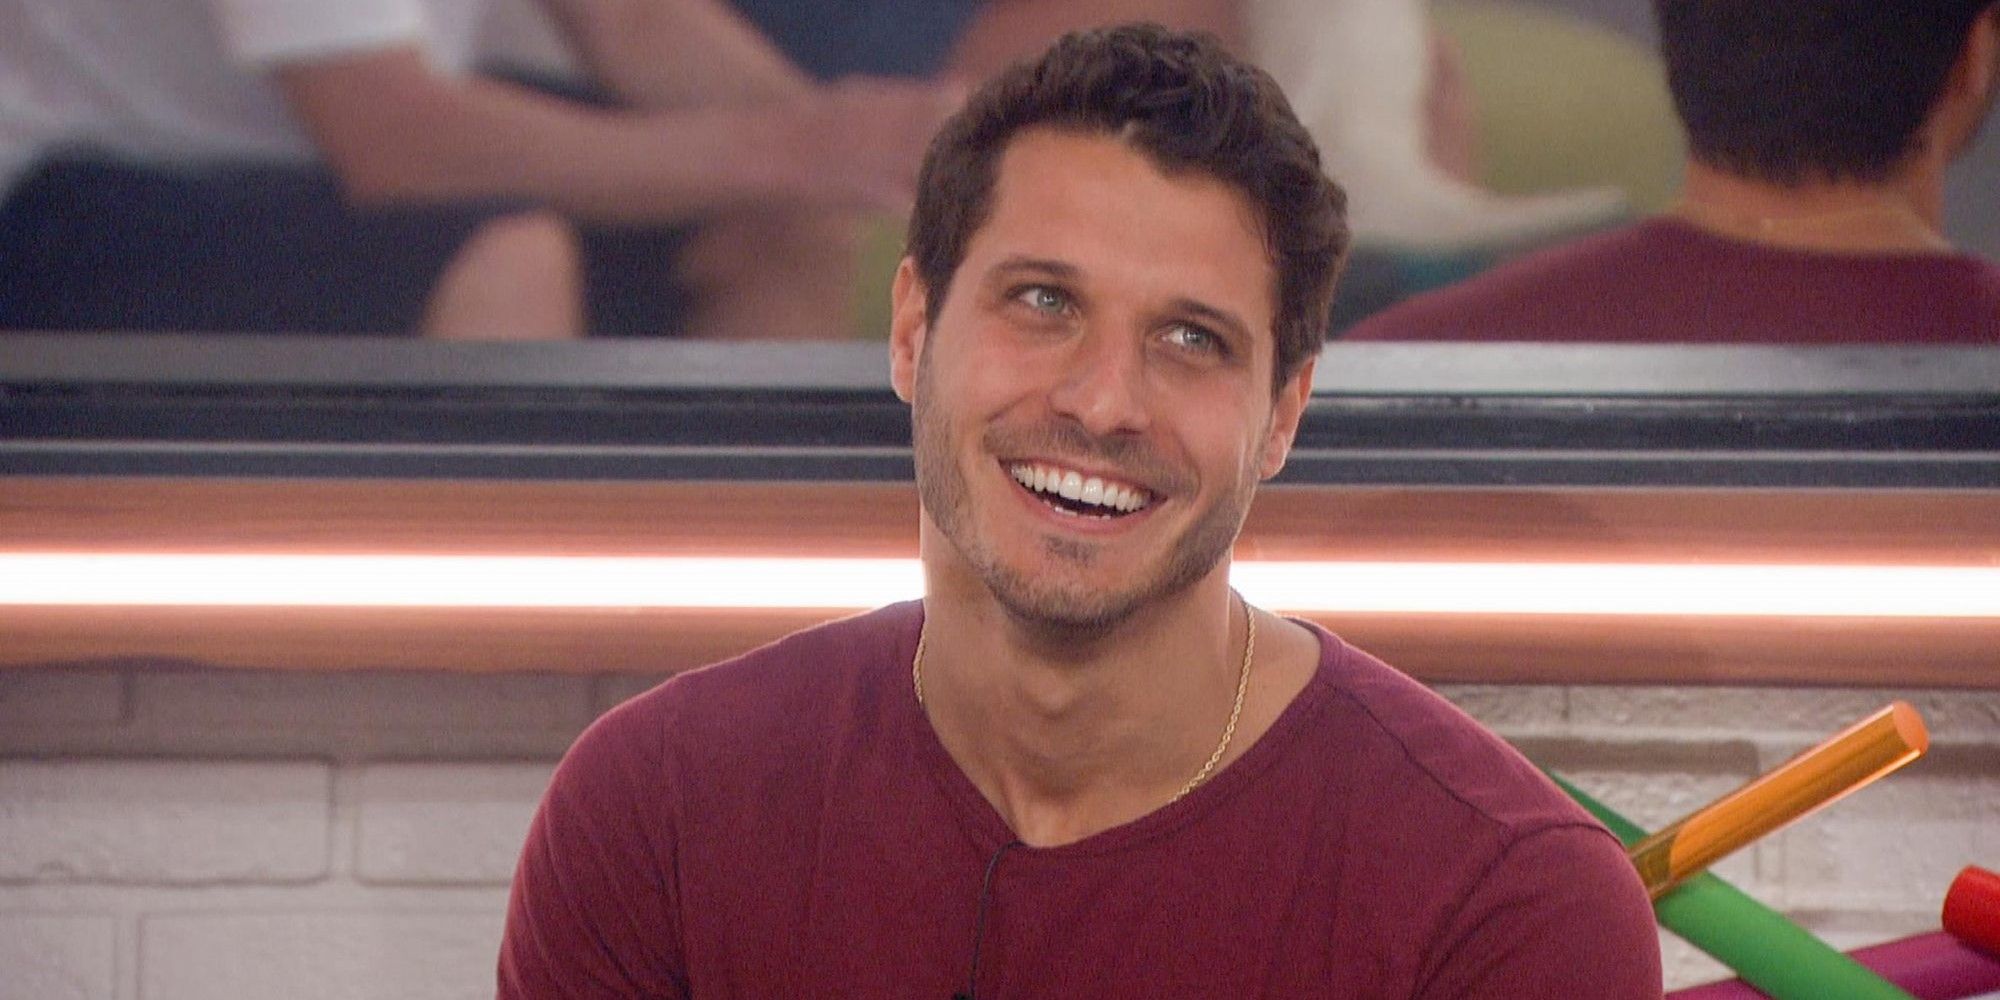 Cody Calafiore from Big Brother